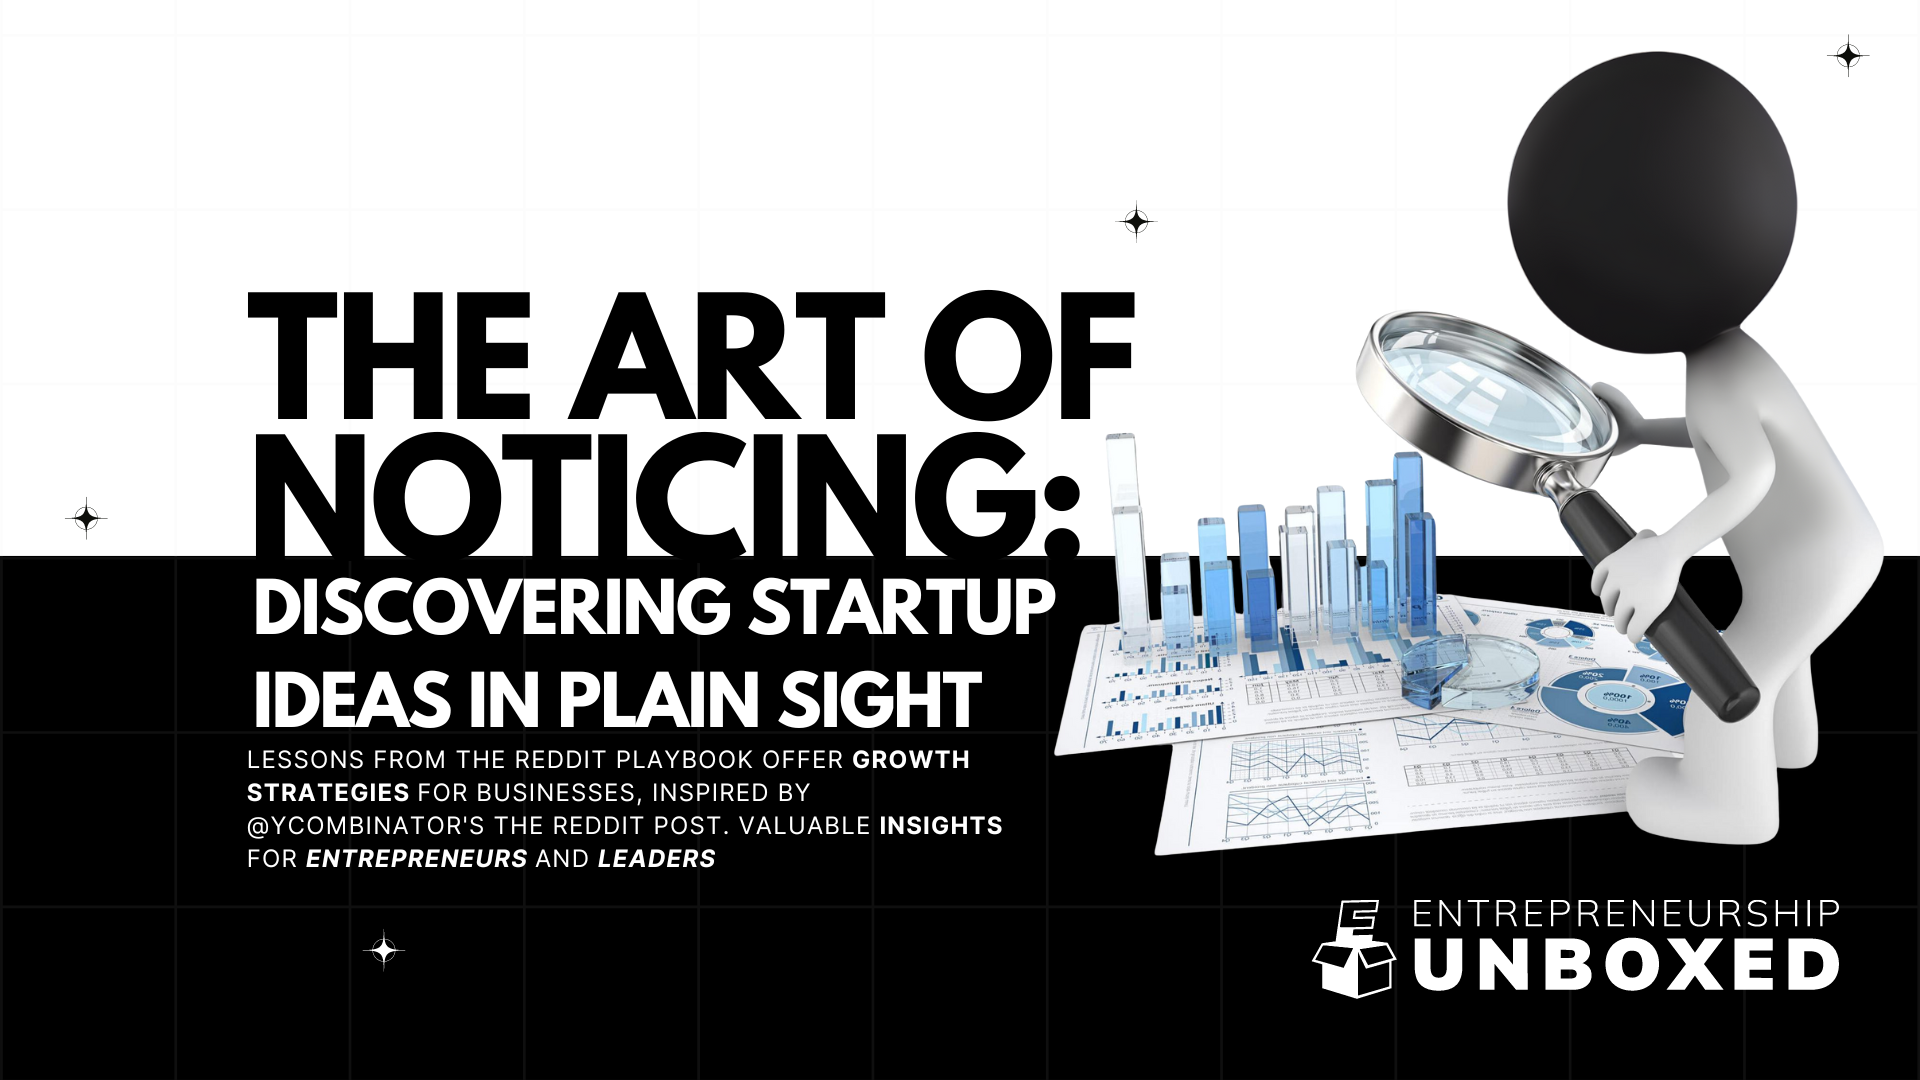 The Art of Noticing: Discovering Startup Ideas in Plain Sight